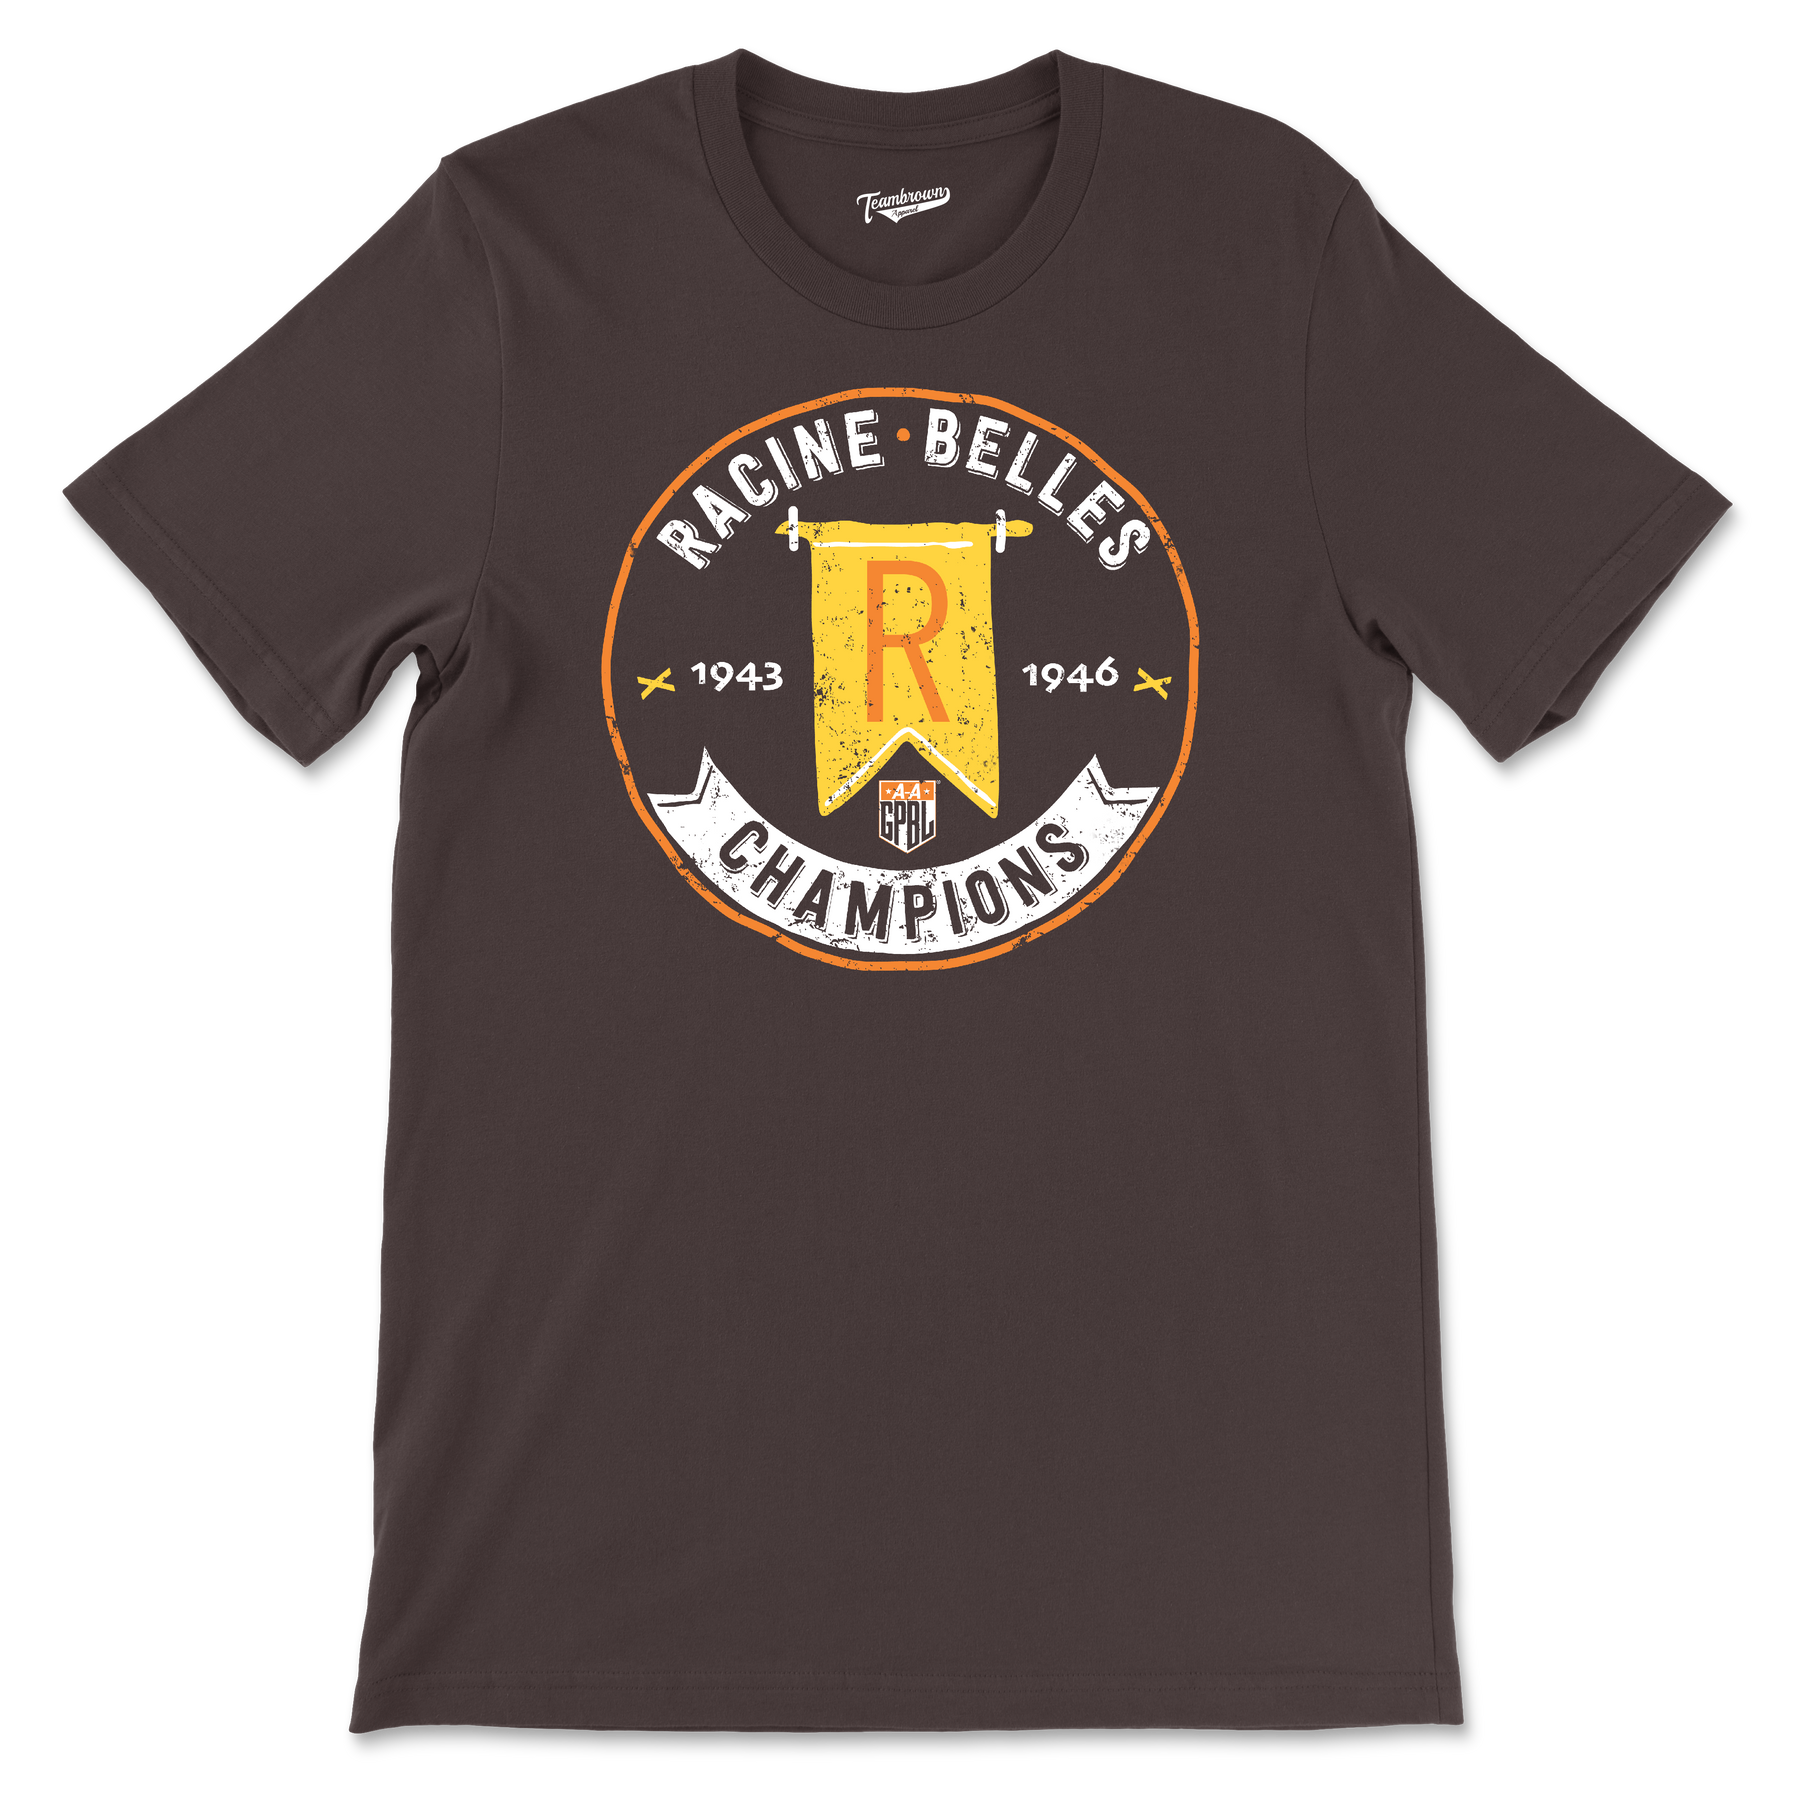 Racine Belles Champions - Unisex T-Shirt | Officially Licensed - AAGPBL